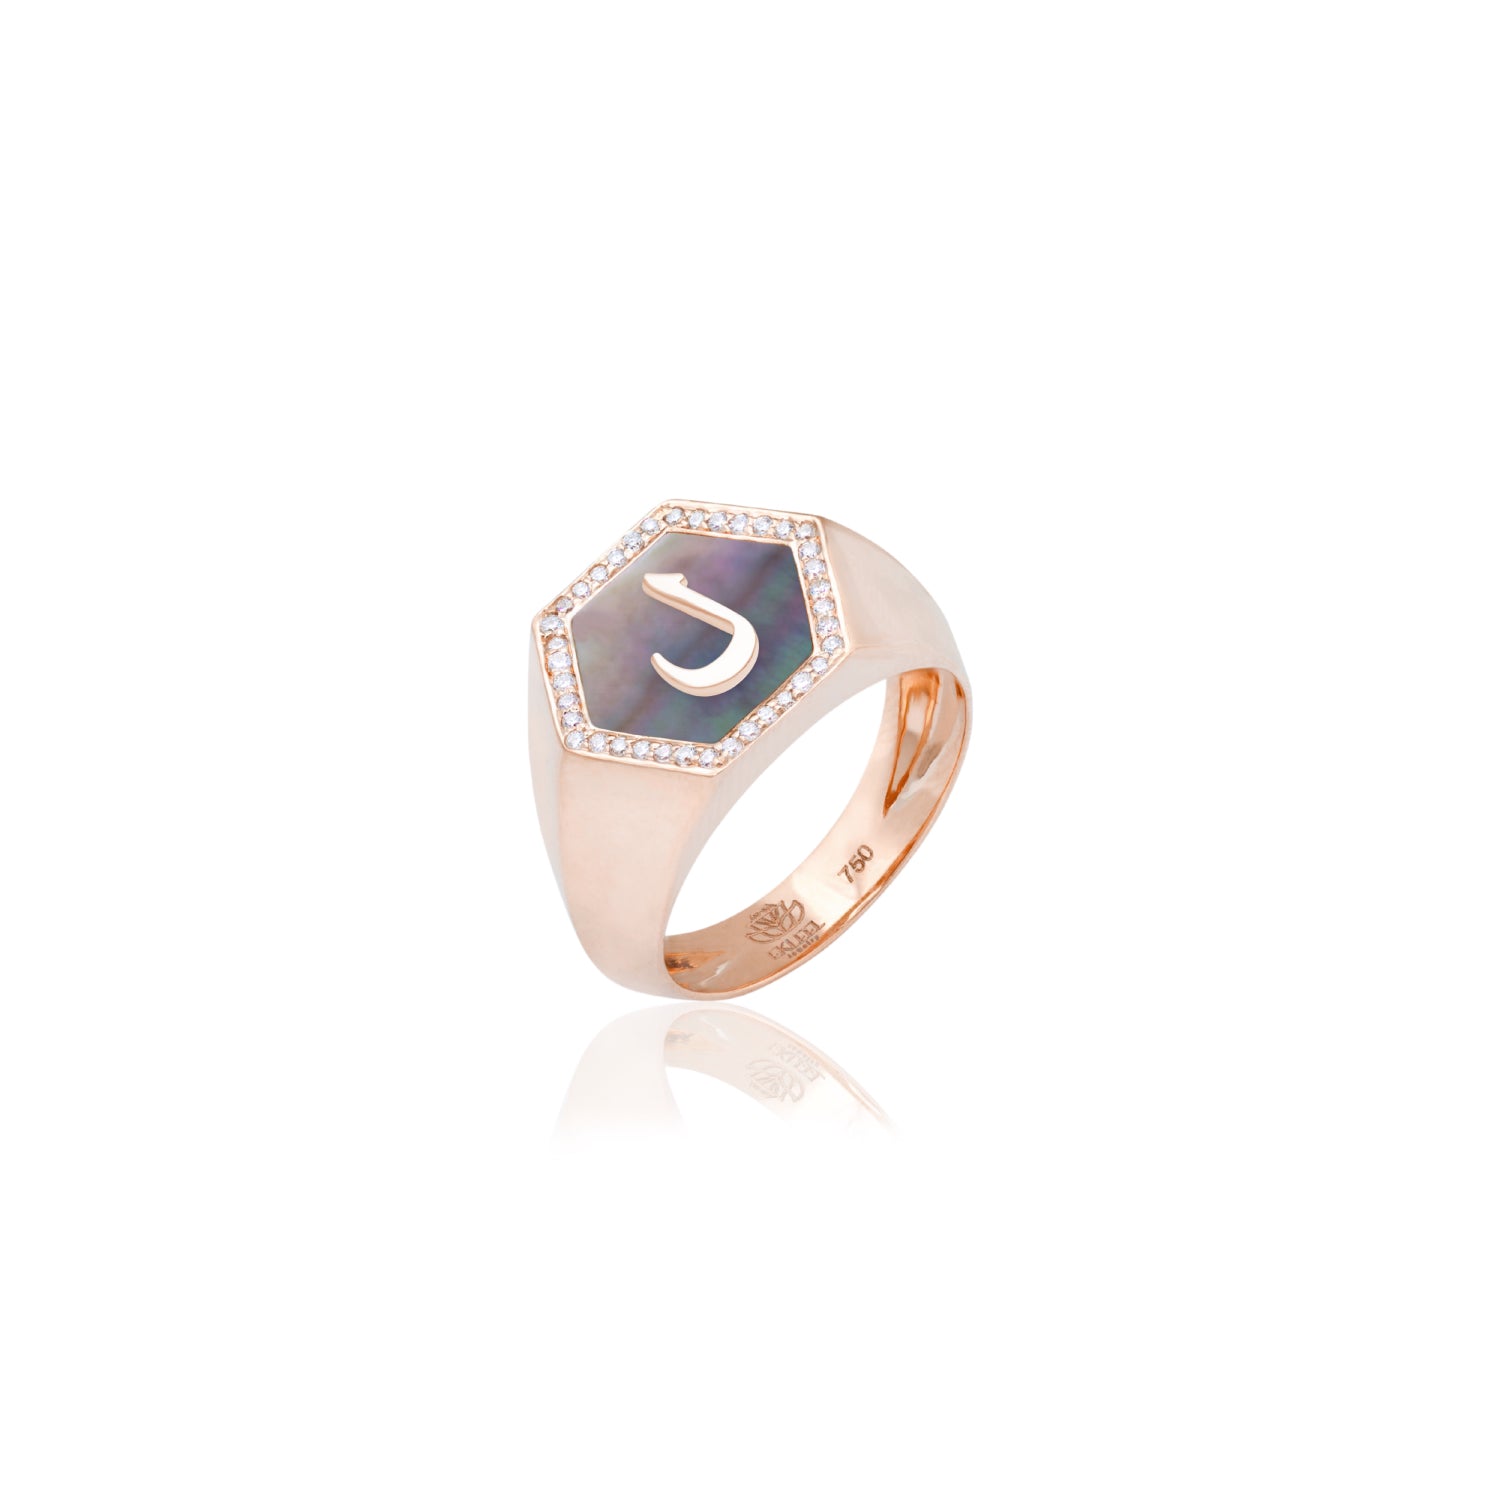 Qamoos 2.0 Letter ل Black Mother of Pearl and Diamond Signet Ring in Rose Gold